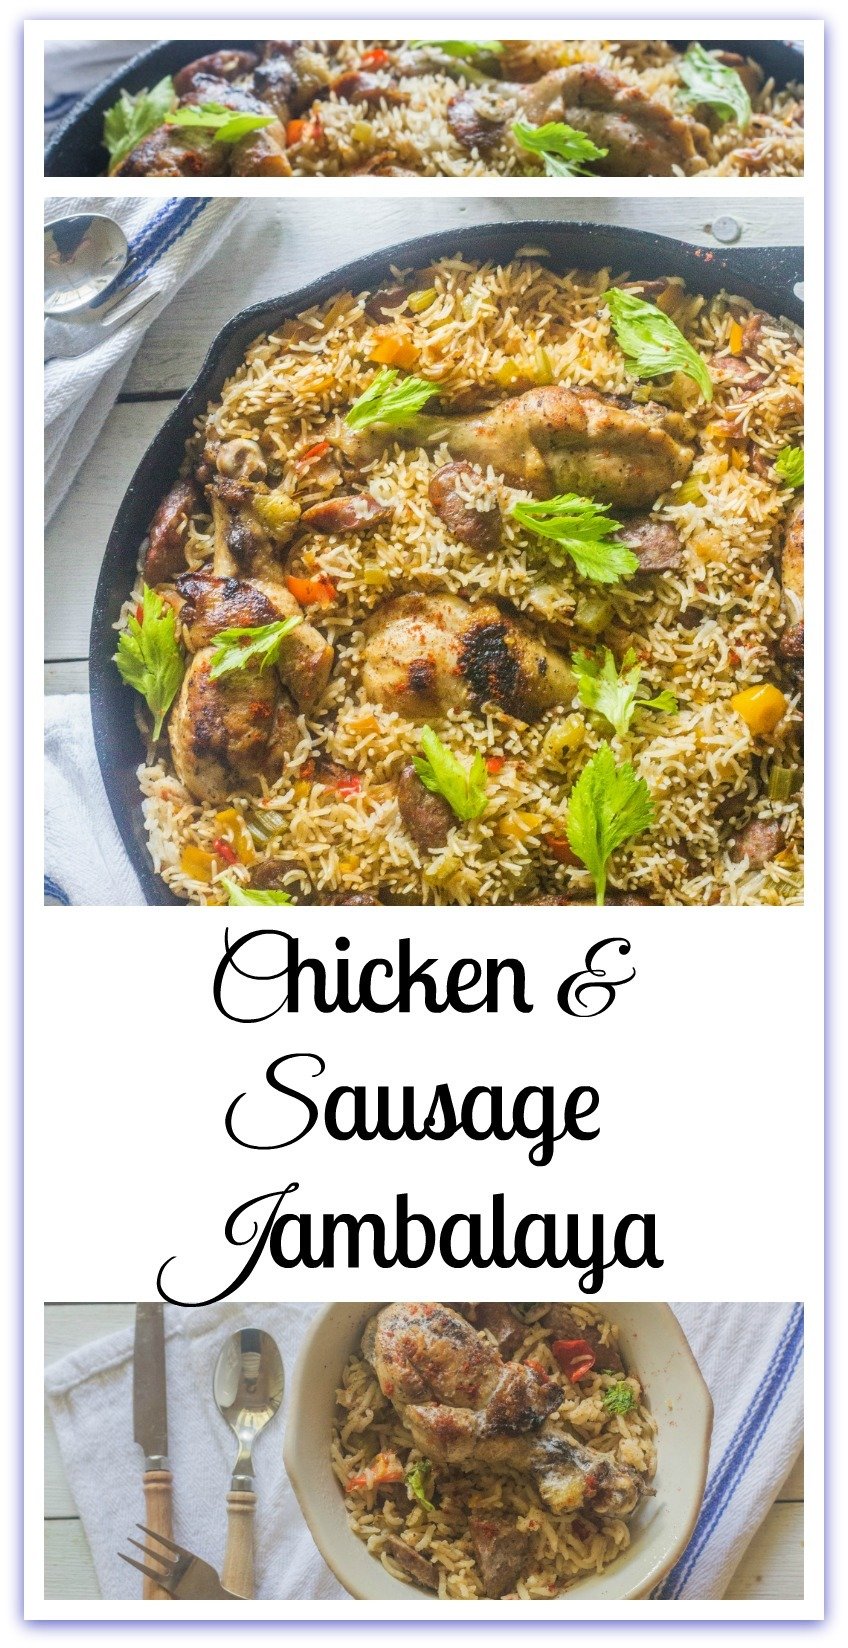 Chicken and Sausage Jambalaya. A one pot meal . Chicken, sausage, vegetables and rice seasoned with Cajun seasoning, cooked in a cast iron skillet.